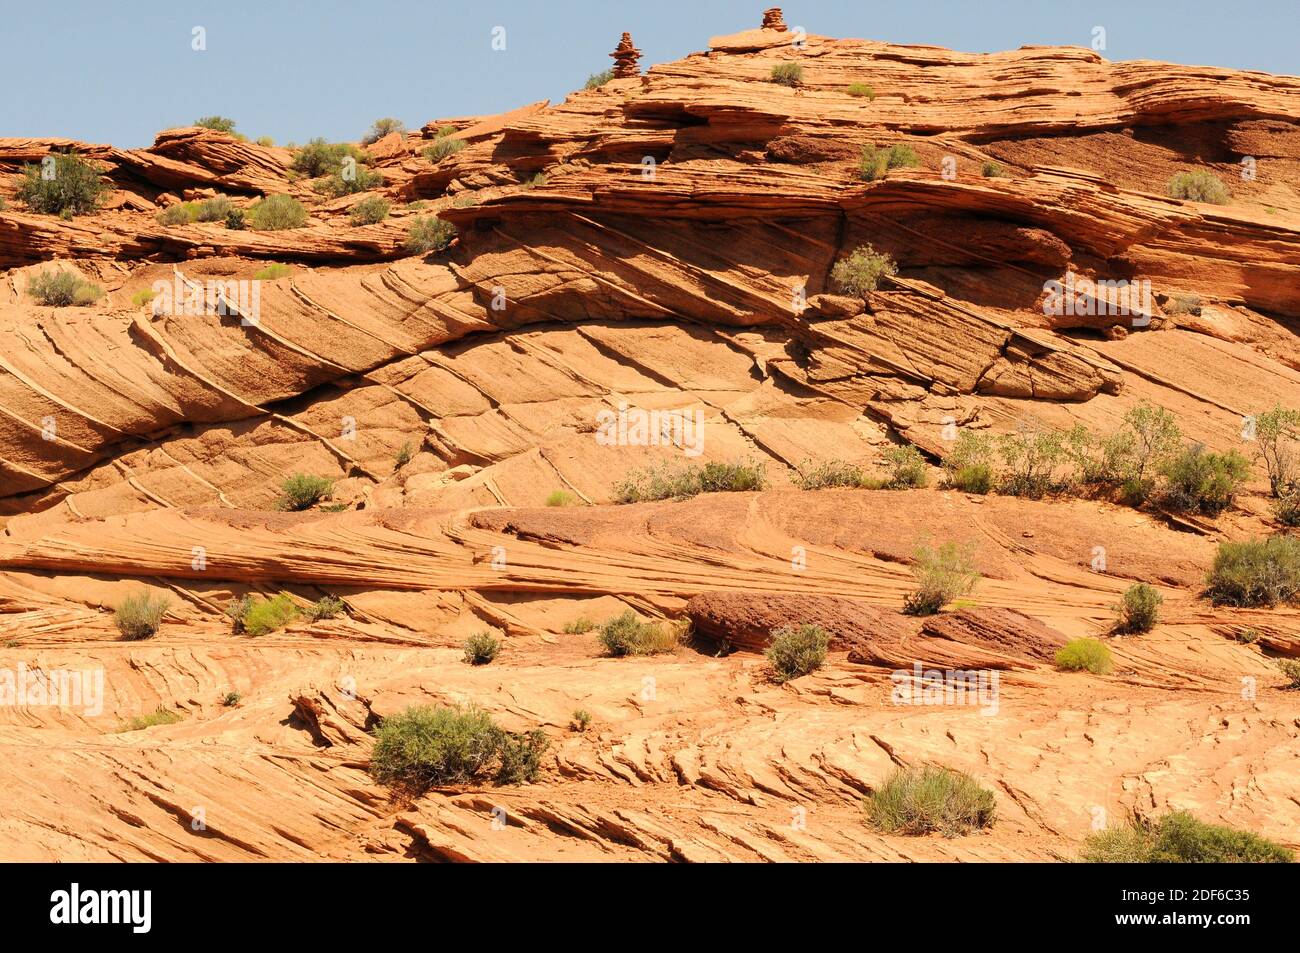 Cross-bending in red sandstone. This photo was taken near Page, Arizona, USA. Stock Photo